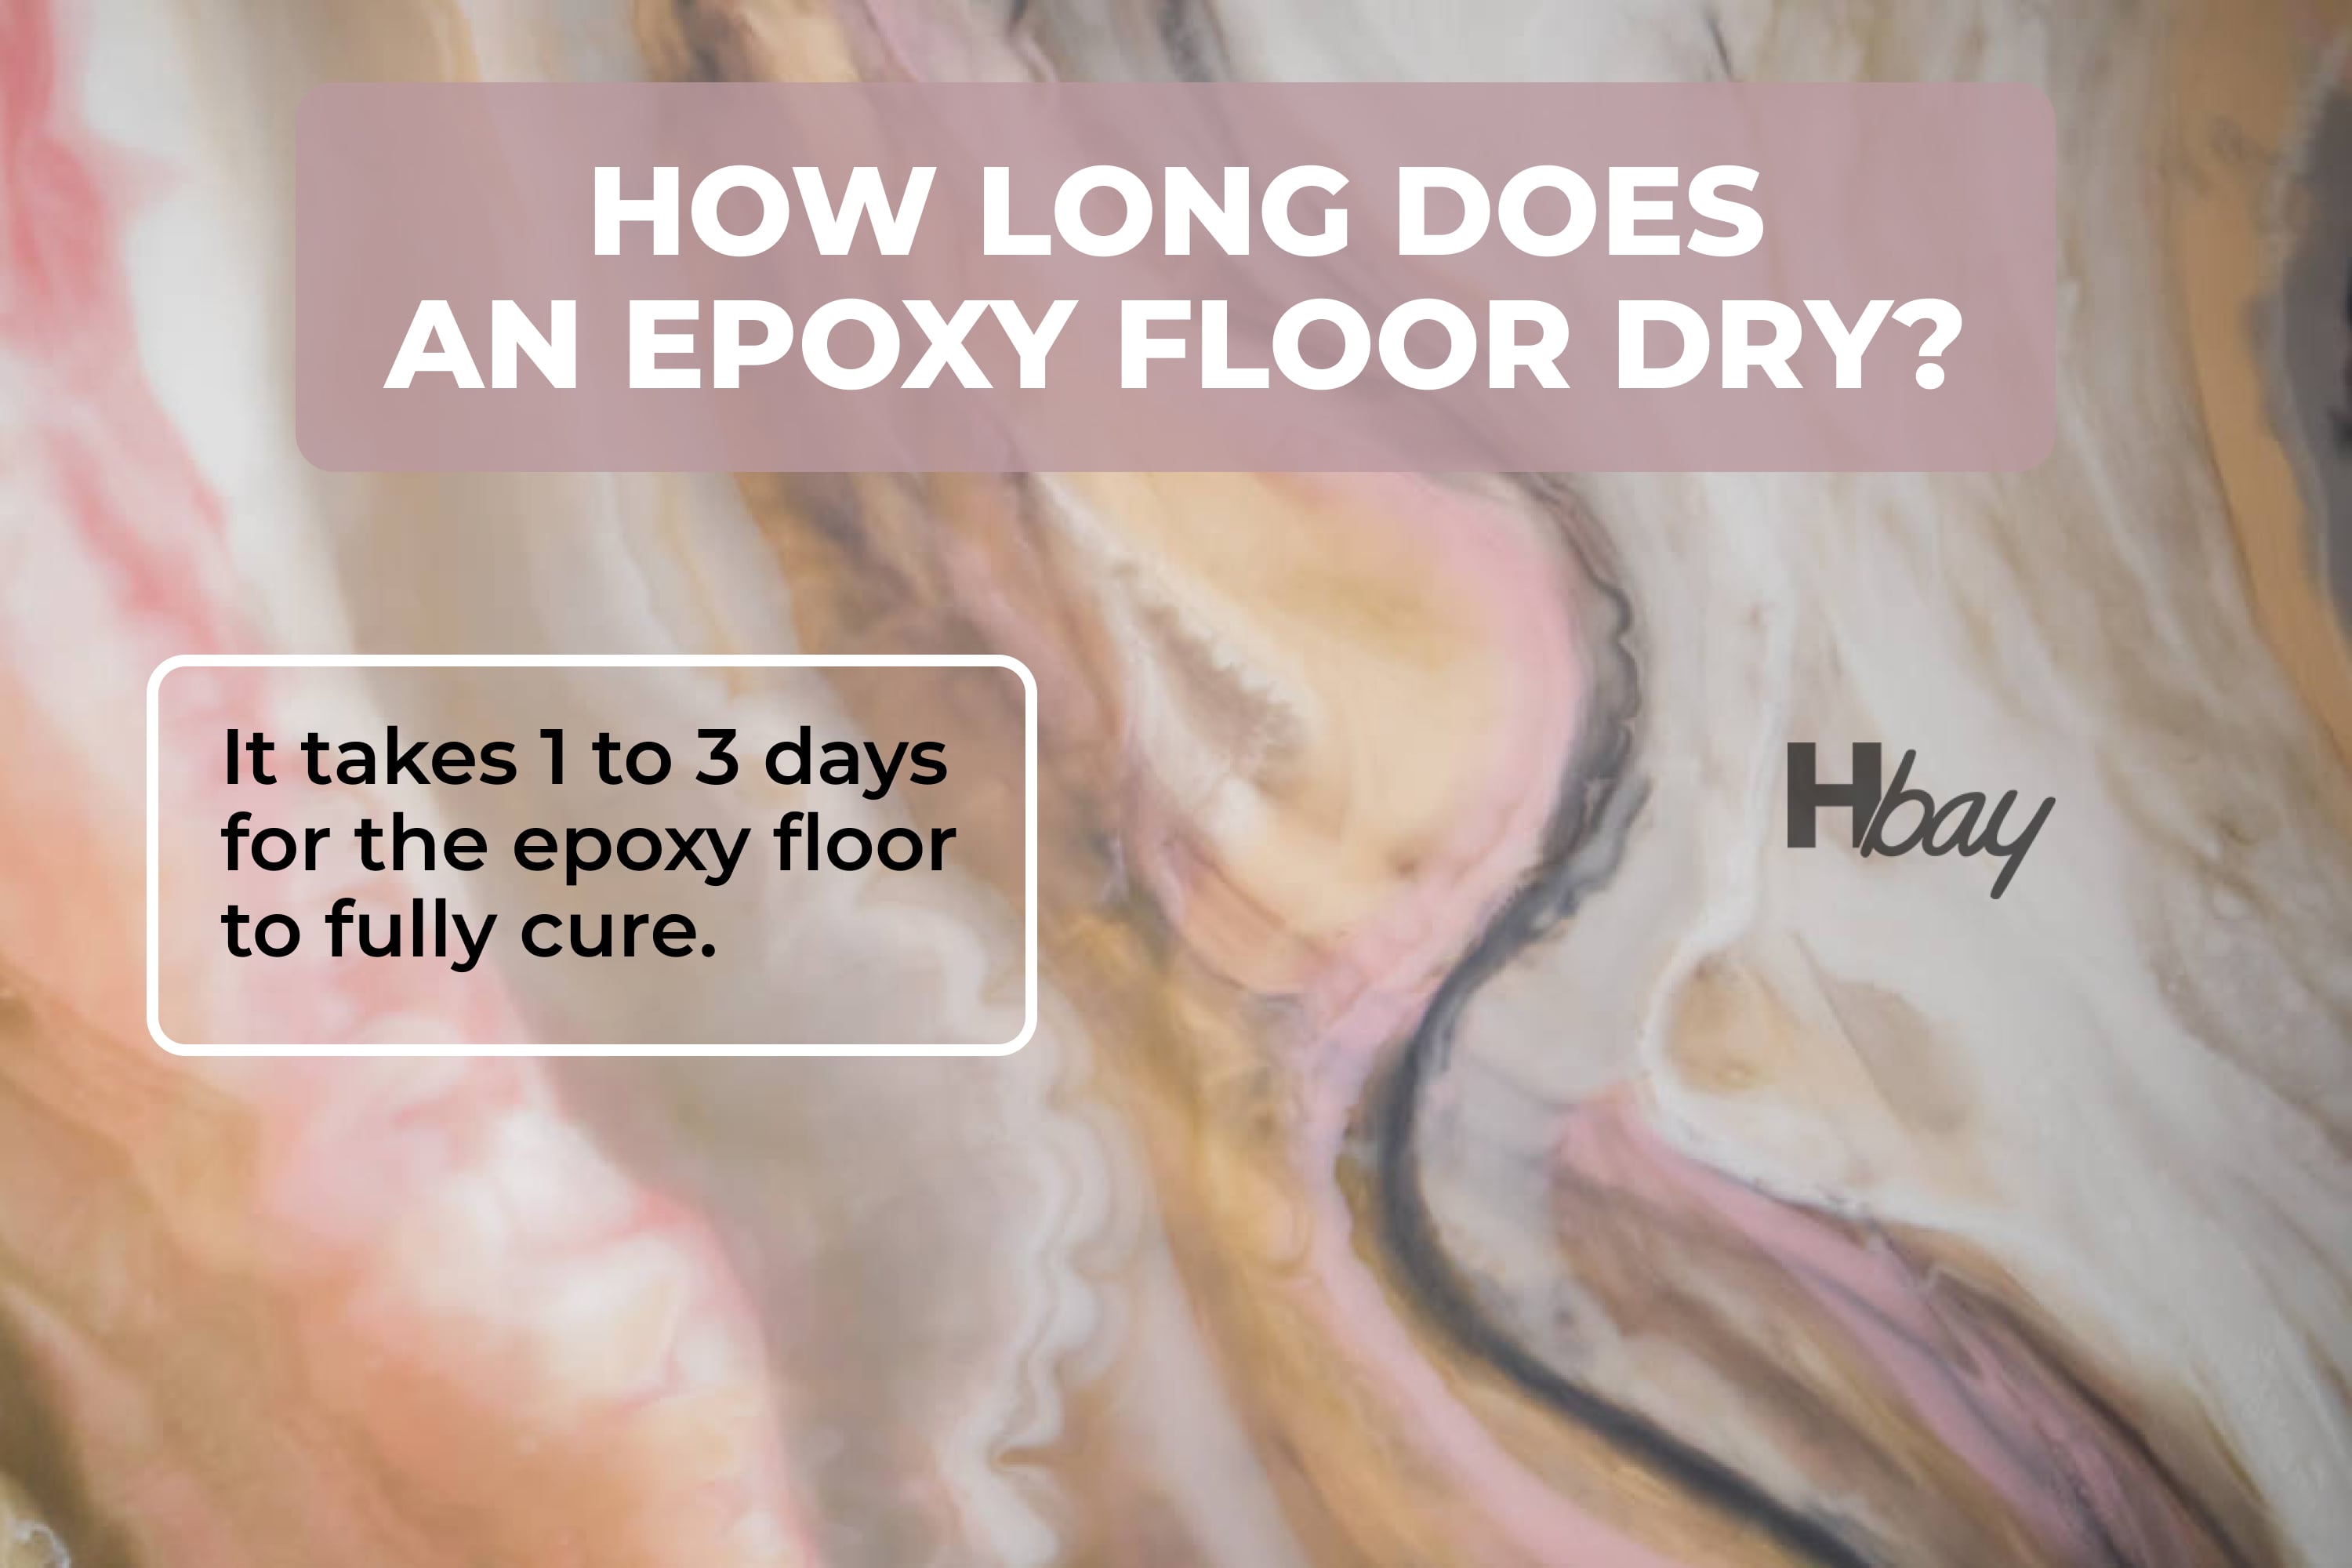 How long does an epoxy floor dry